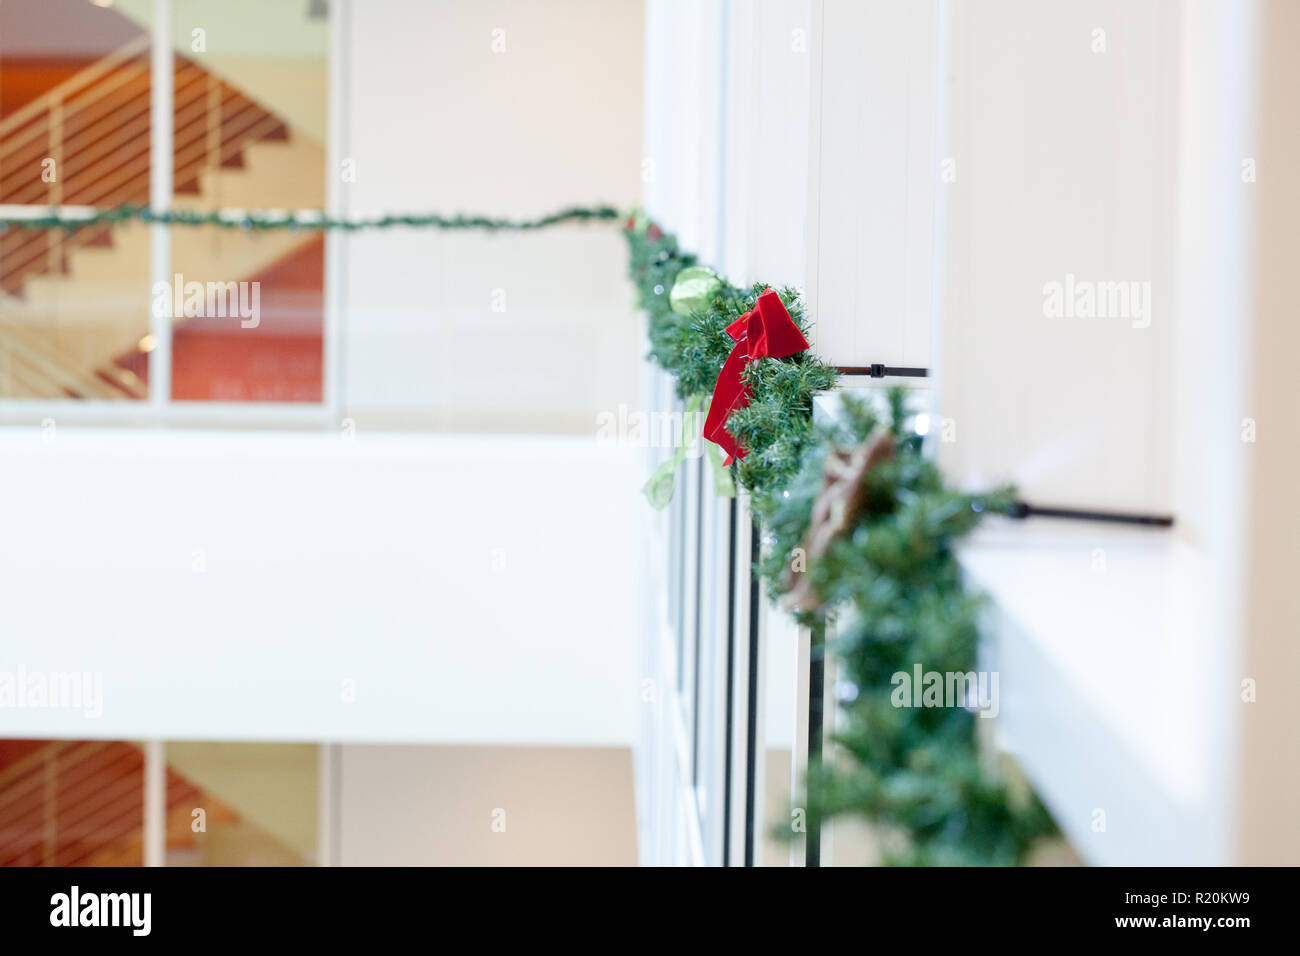 Holiday Decorations Hanging In Office Building Stock Photo